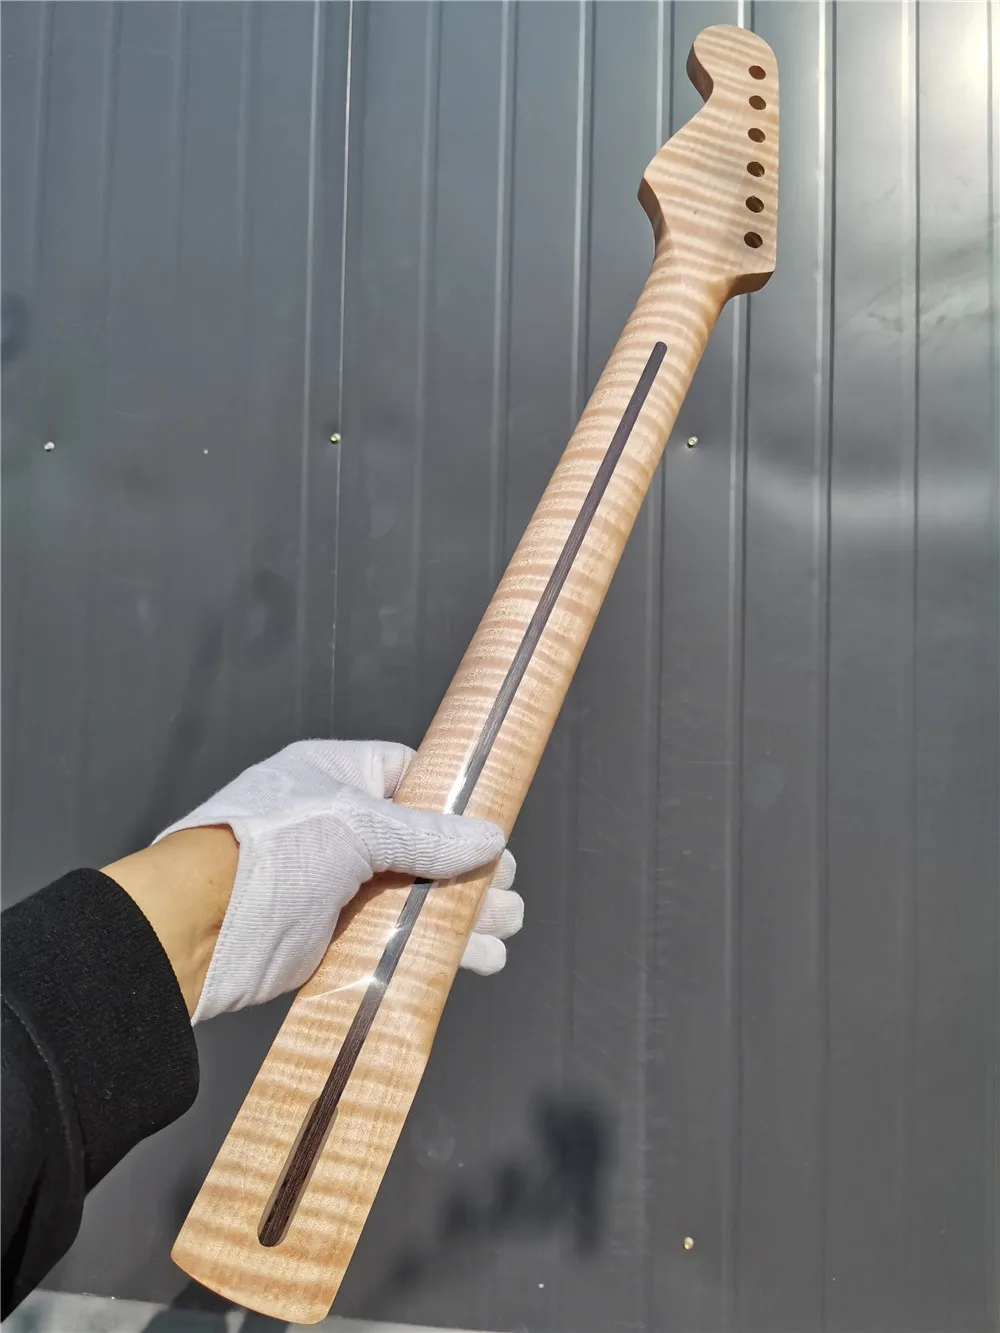 

38#Tiger Flame Maple Guitar Neck 21 Fret 25.5inch Dark Yellow Varnish Pearl Maple Made Fingerboard Dot Inlay DIY